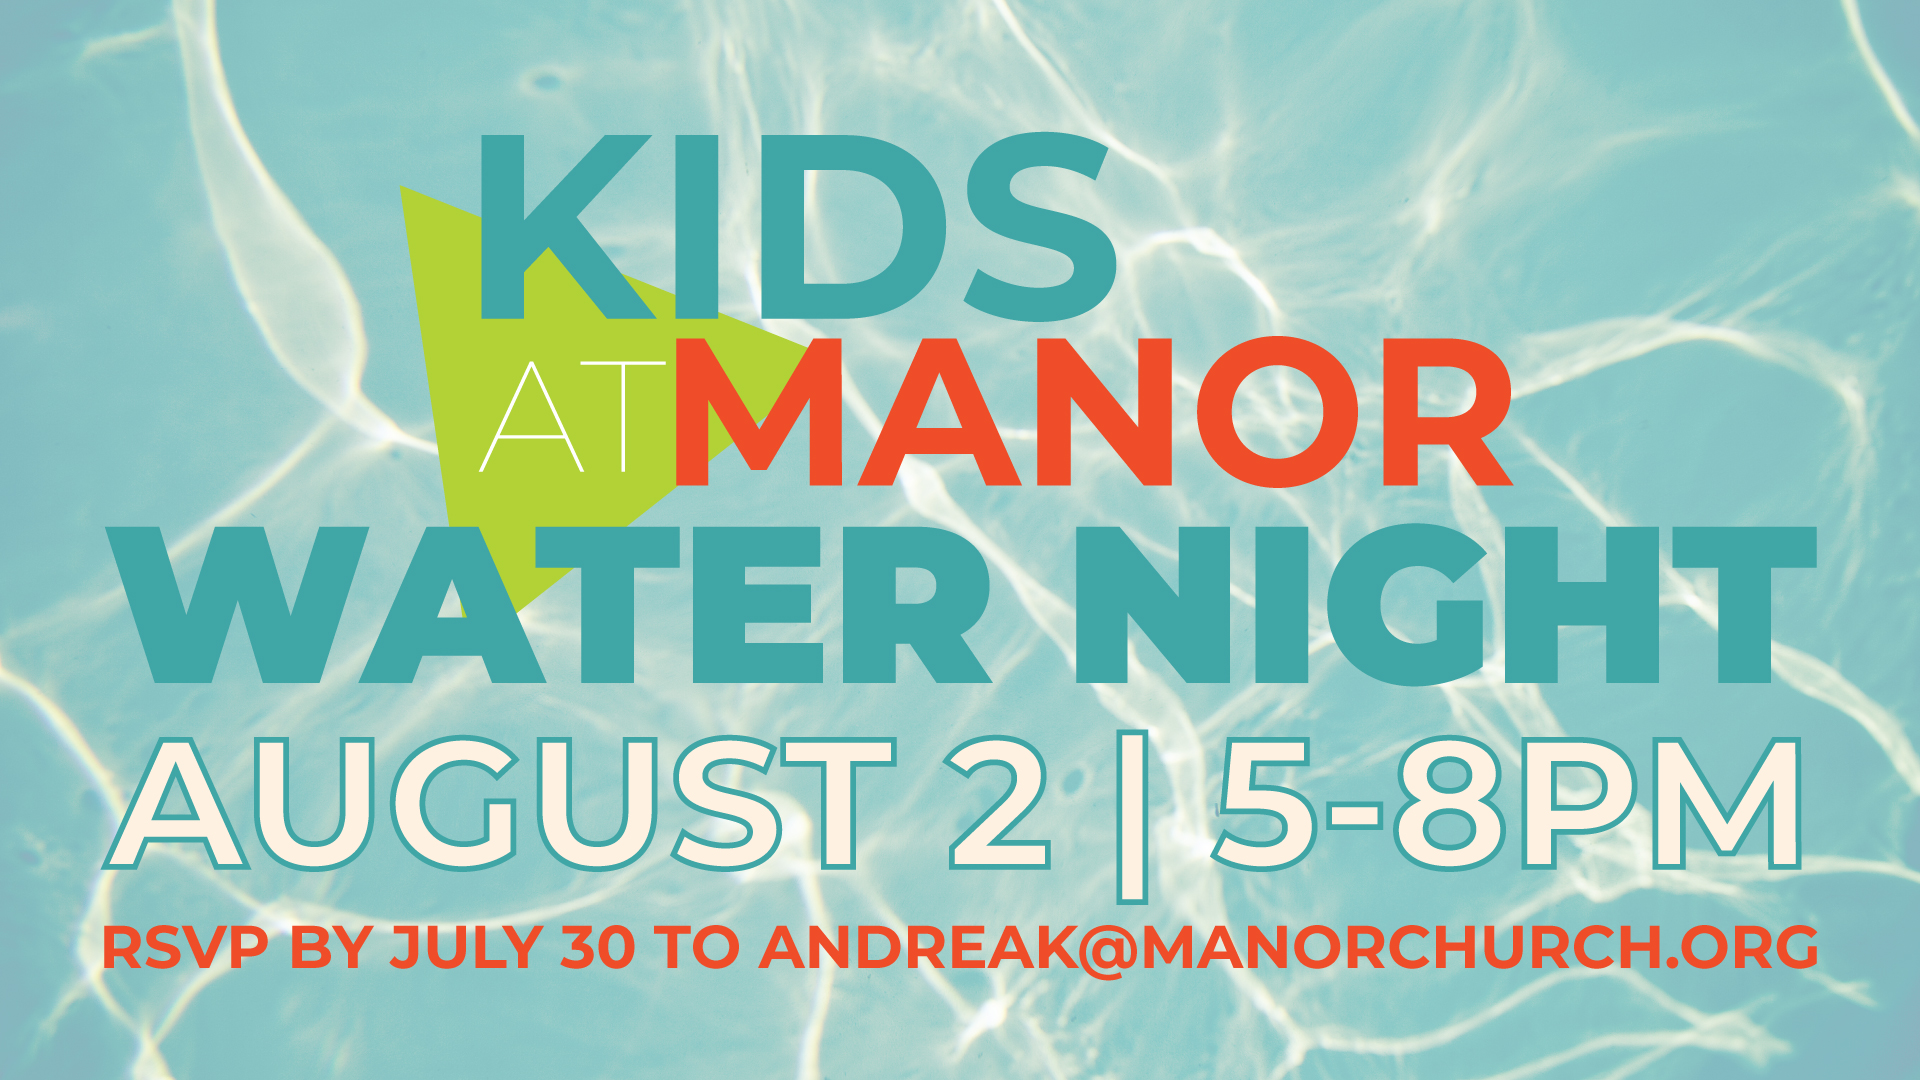 Kids at Manor Water Night | August 2 from 5-8PM. RSVP by July 30 to andreak@manorchurch.org